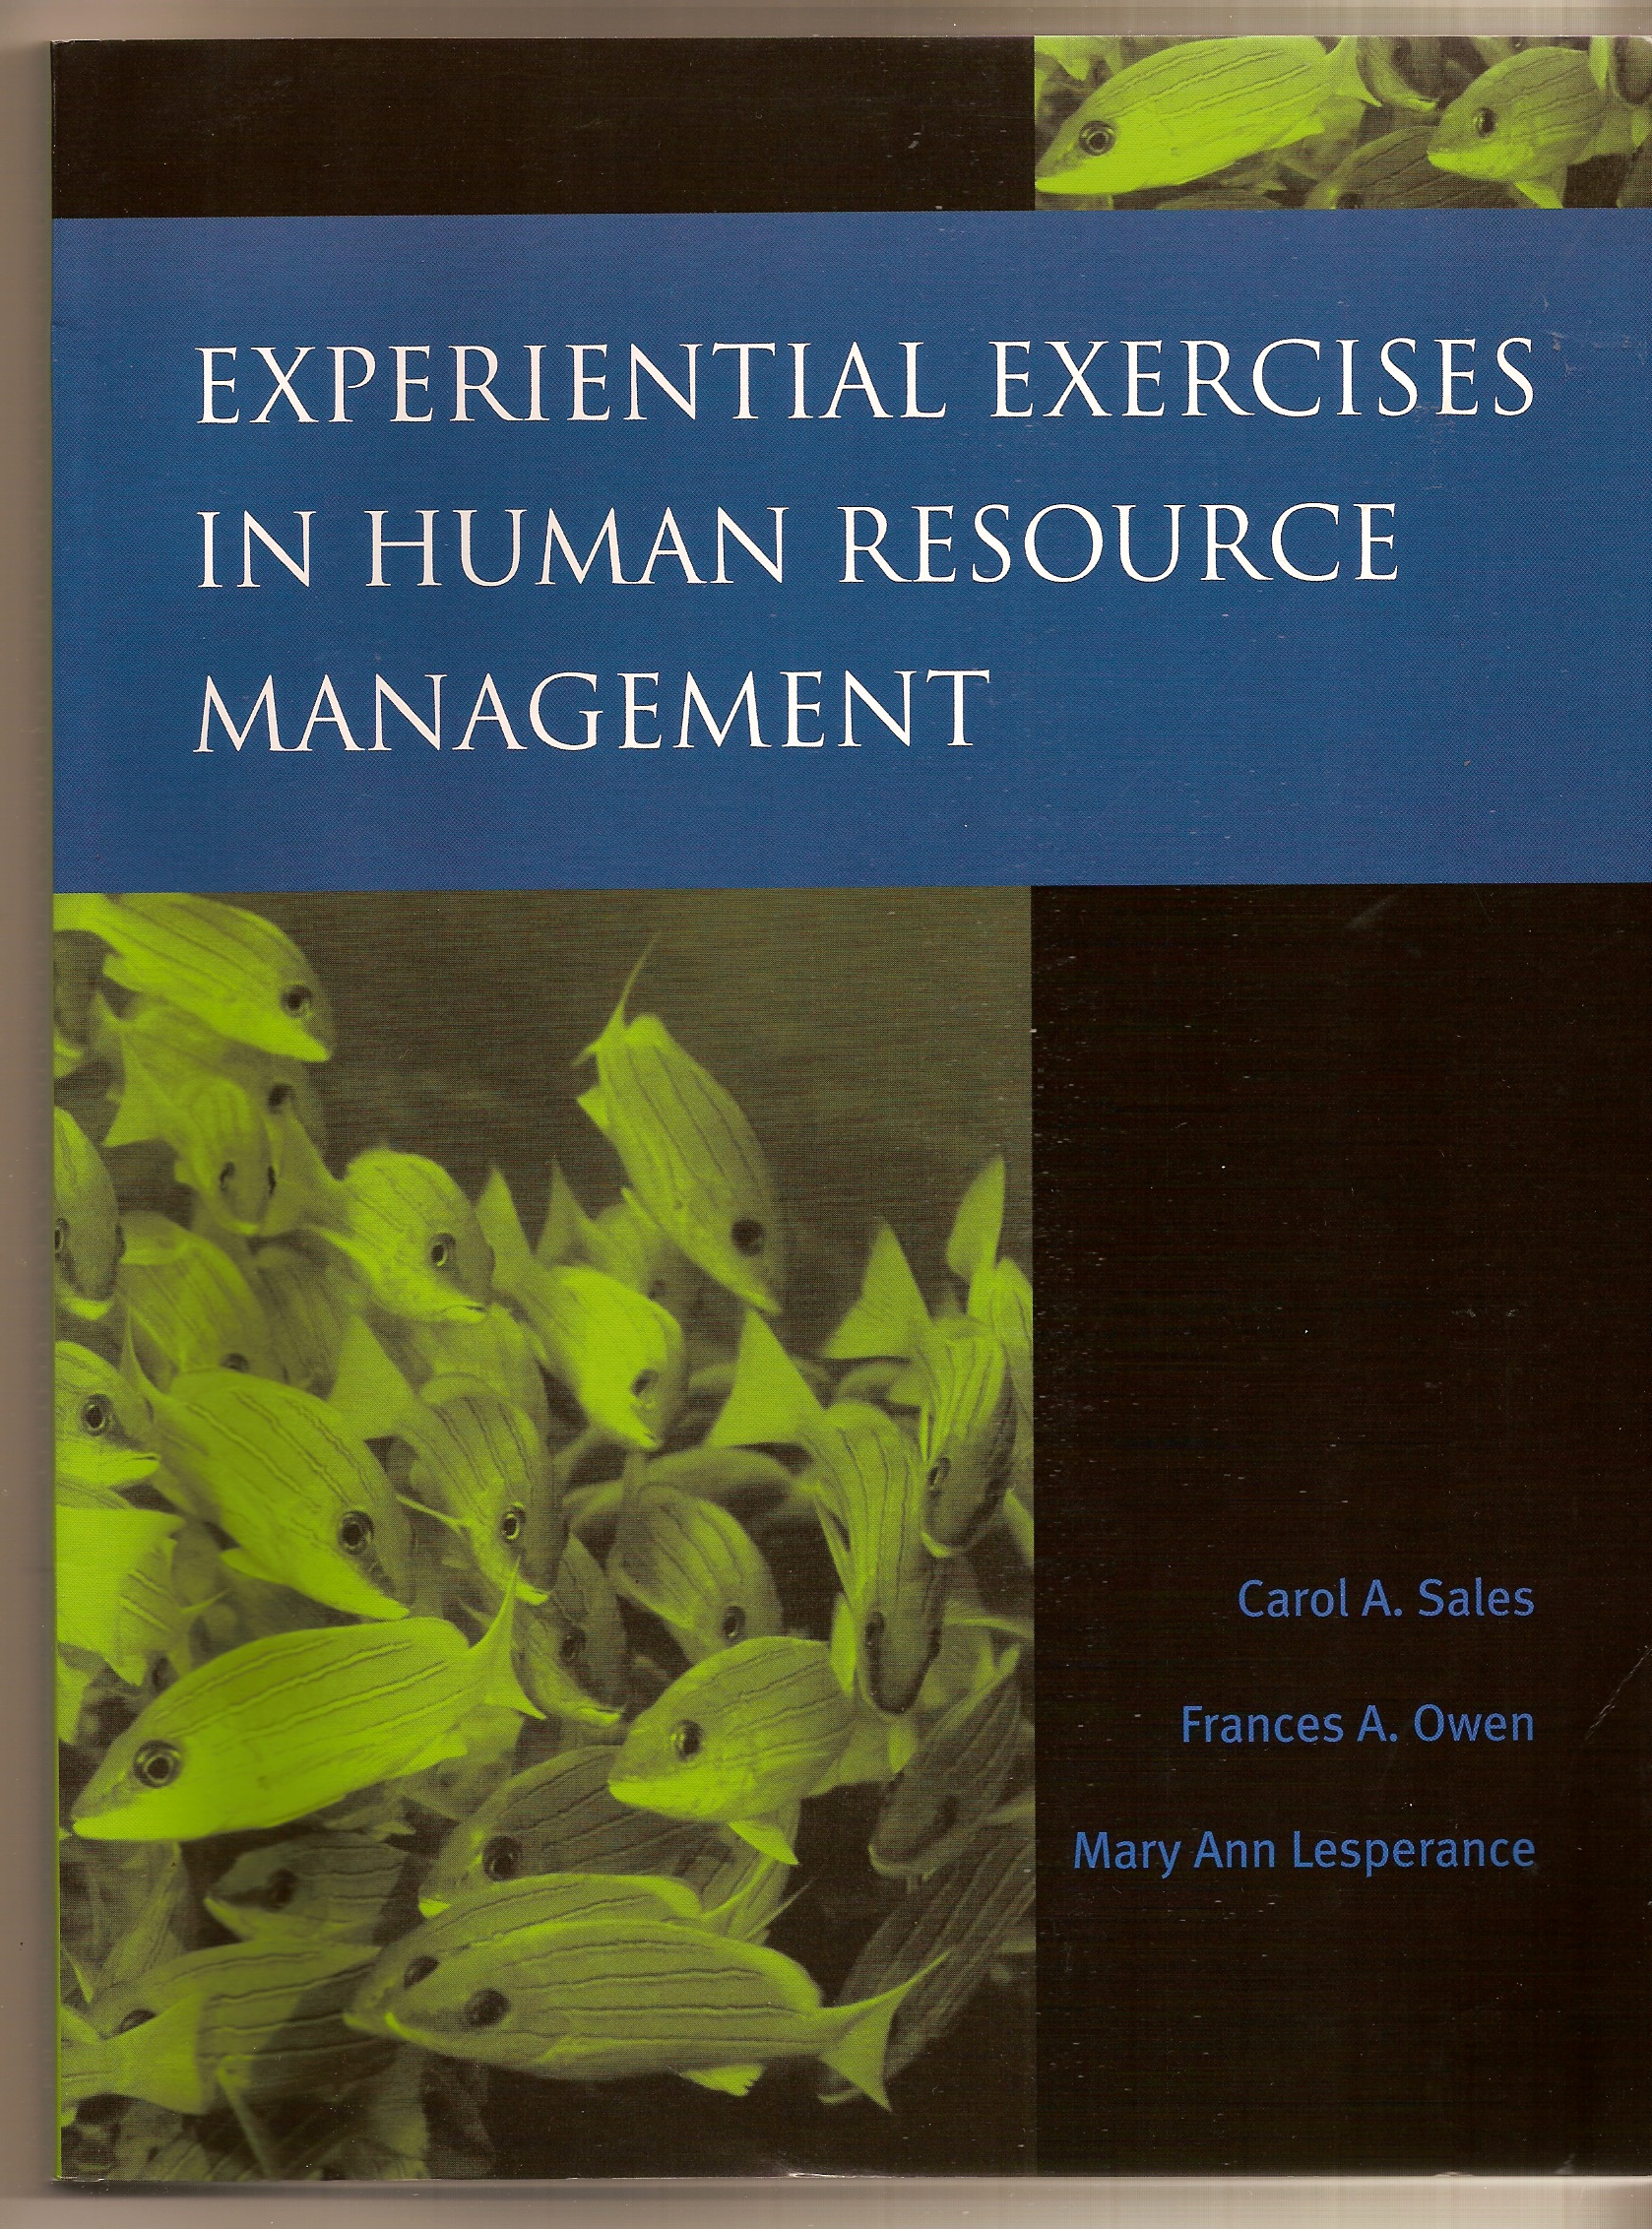 SALES CAROL A. , FRANCES A. OWEN, MARY ANN LESPERANCE - Experiential Exercises in Human Resource Management